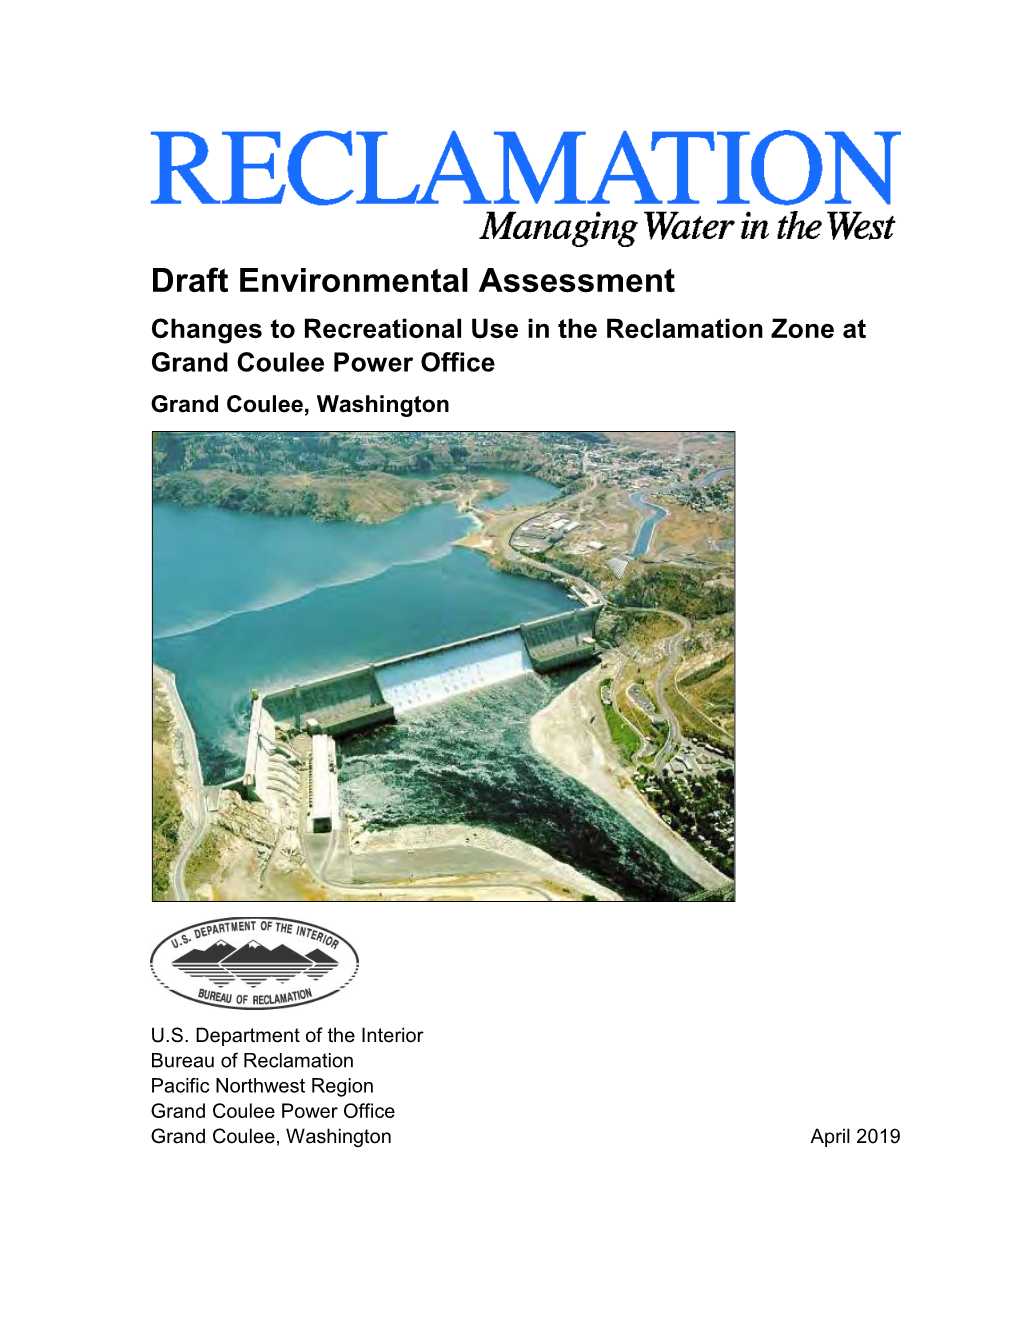 Changes to Recreational Use in the Reclamation Zone at Grand Coulee Power Office Grand Coulee, Washington